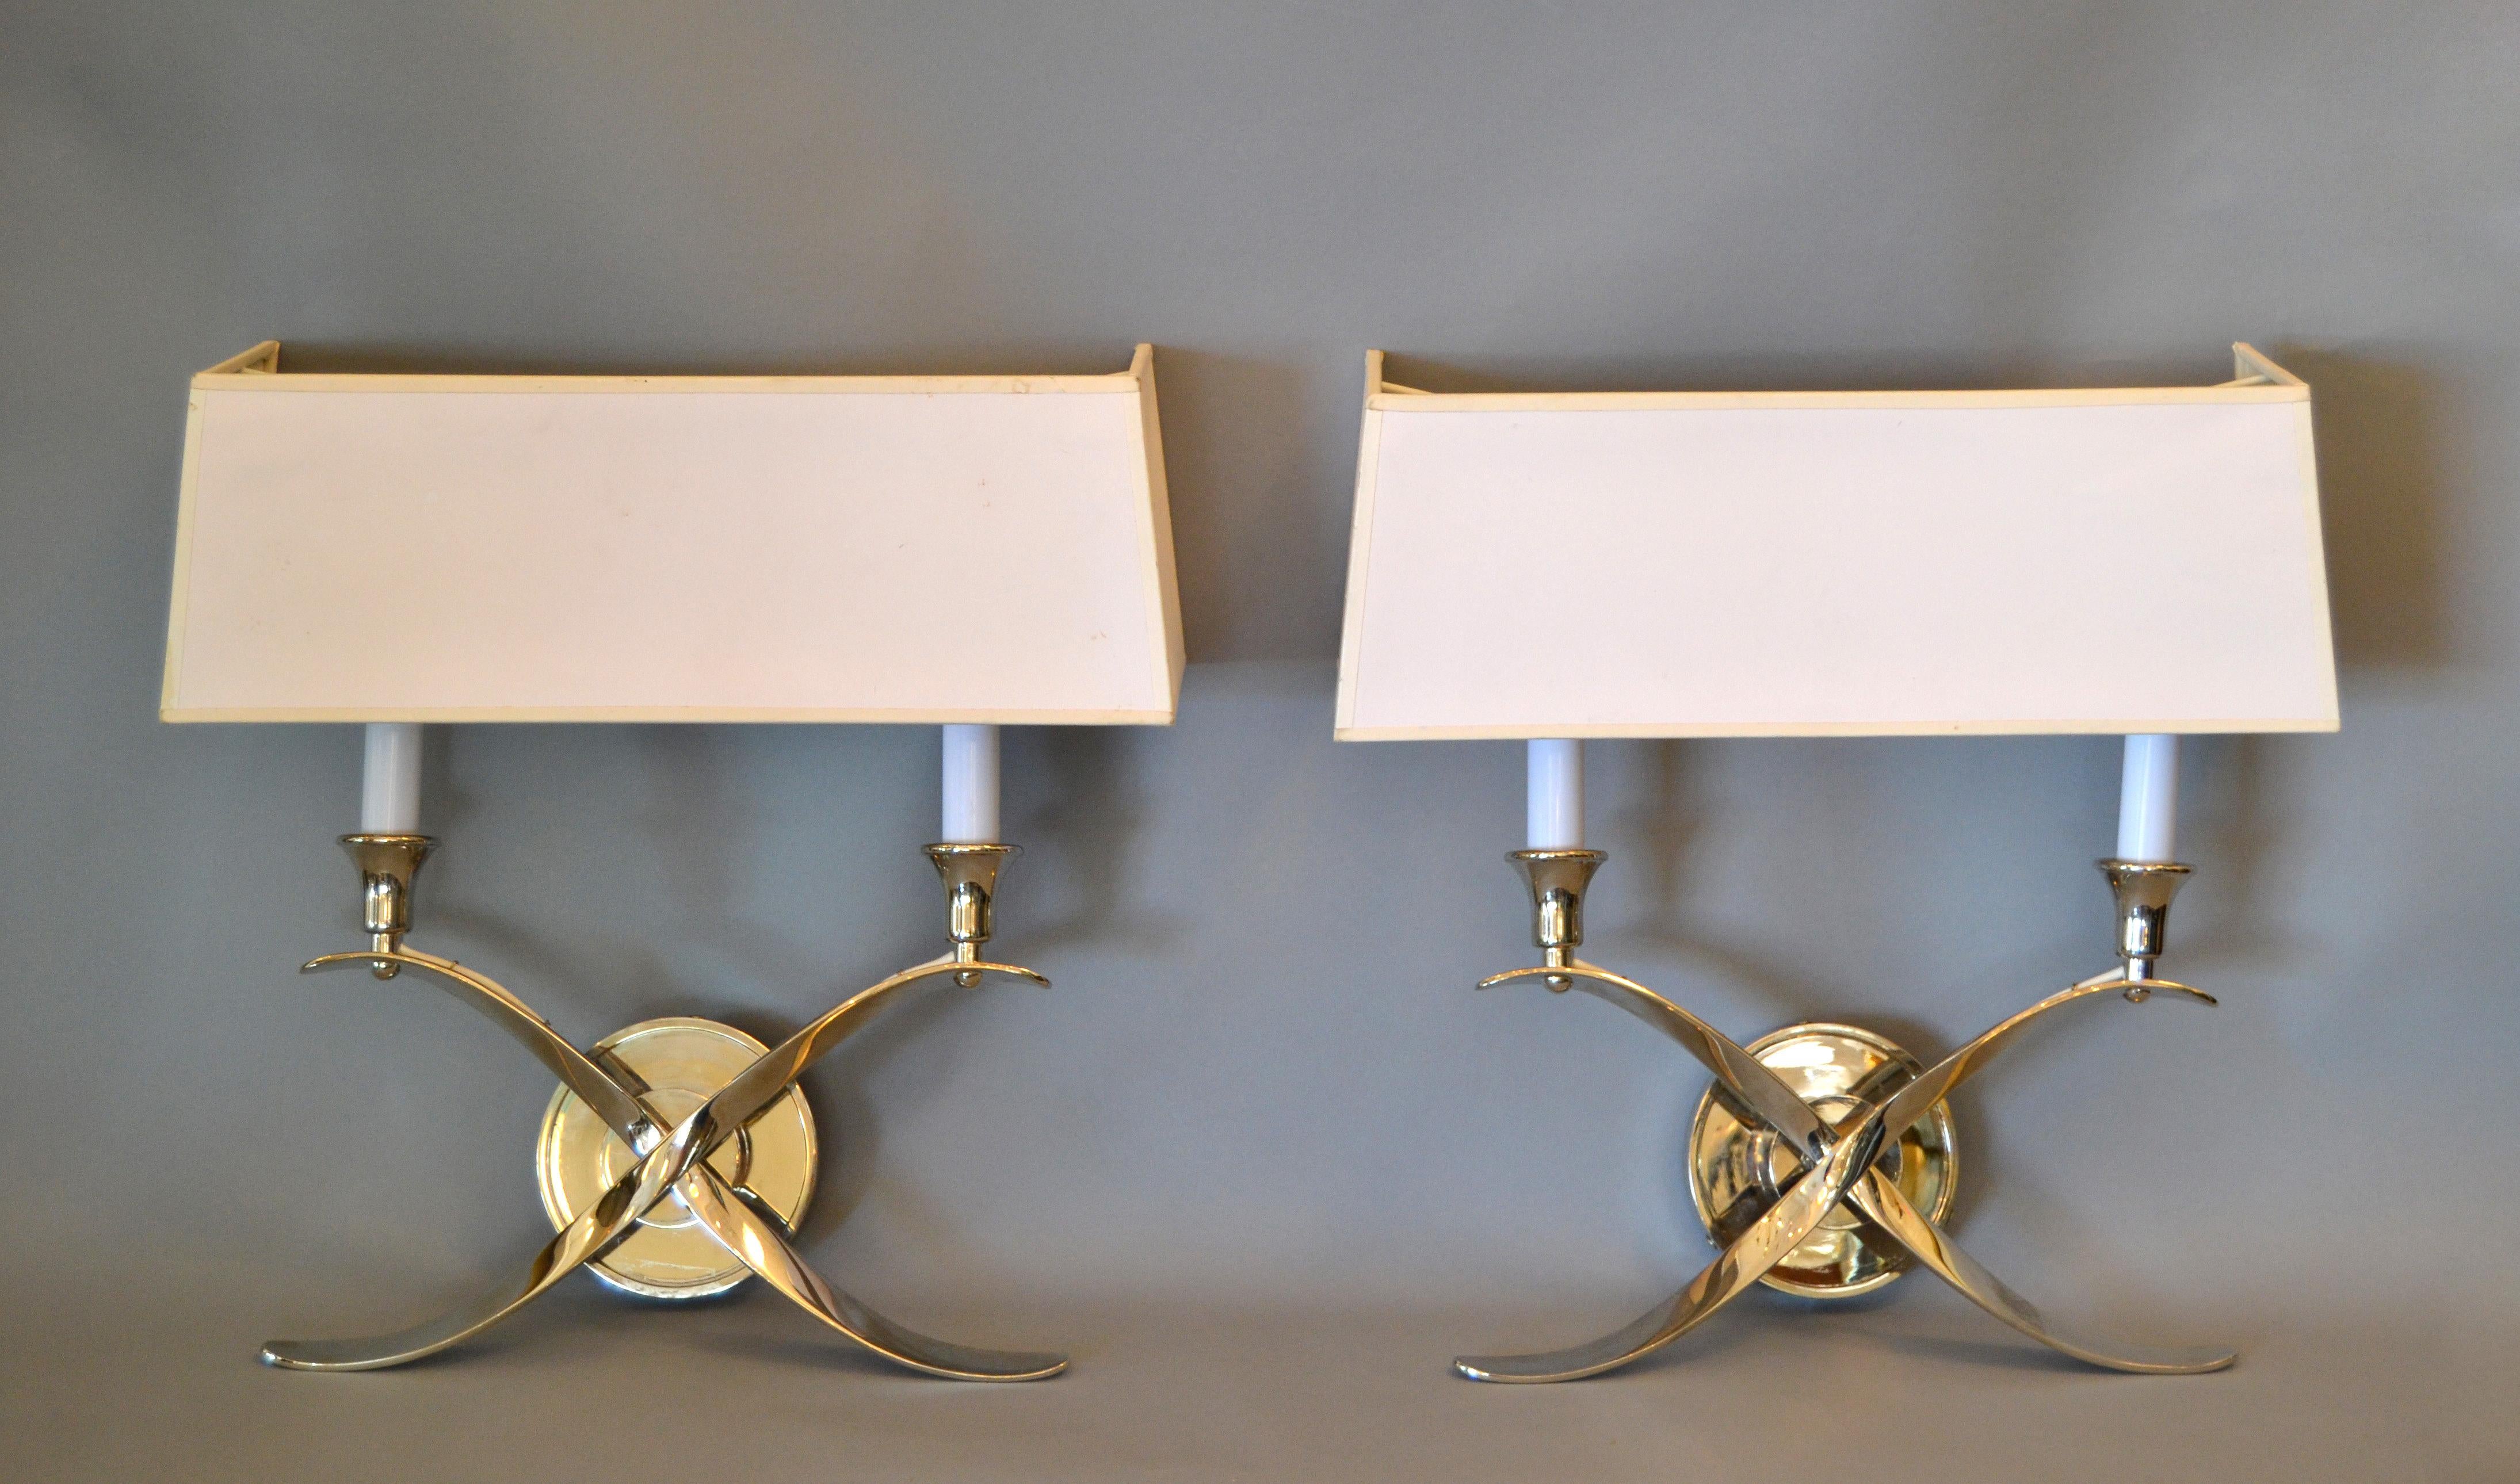 Elegant Crossed Scrollwork Stainless Steel Double Sconces and Paper Shades, Pair 4